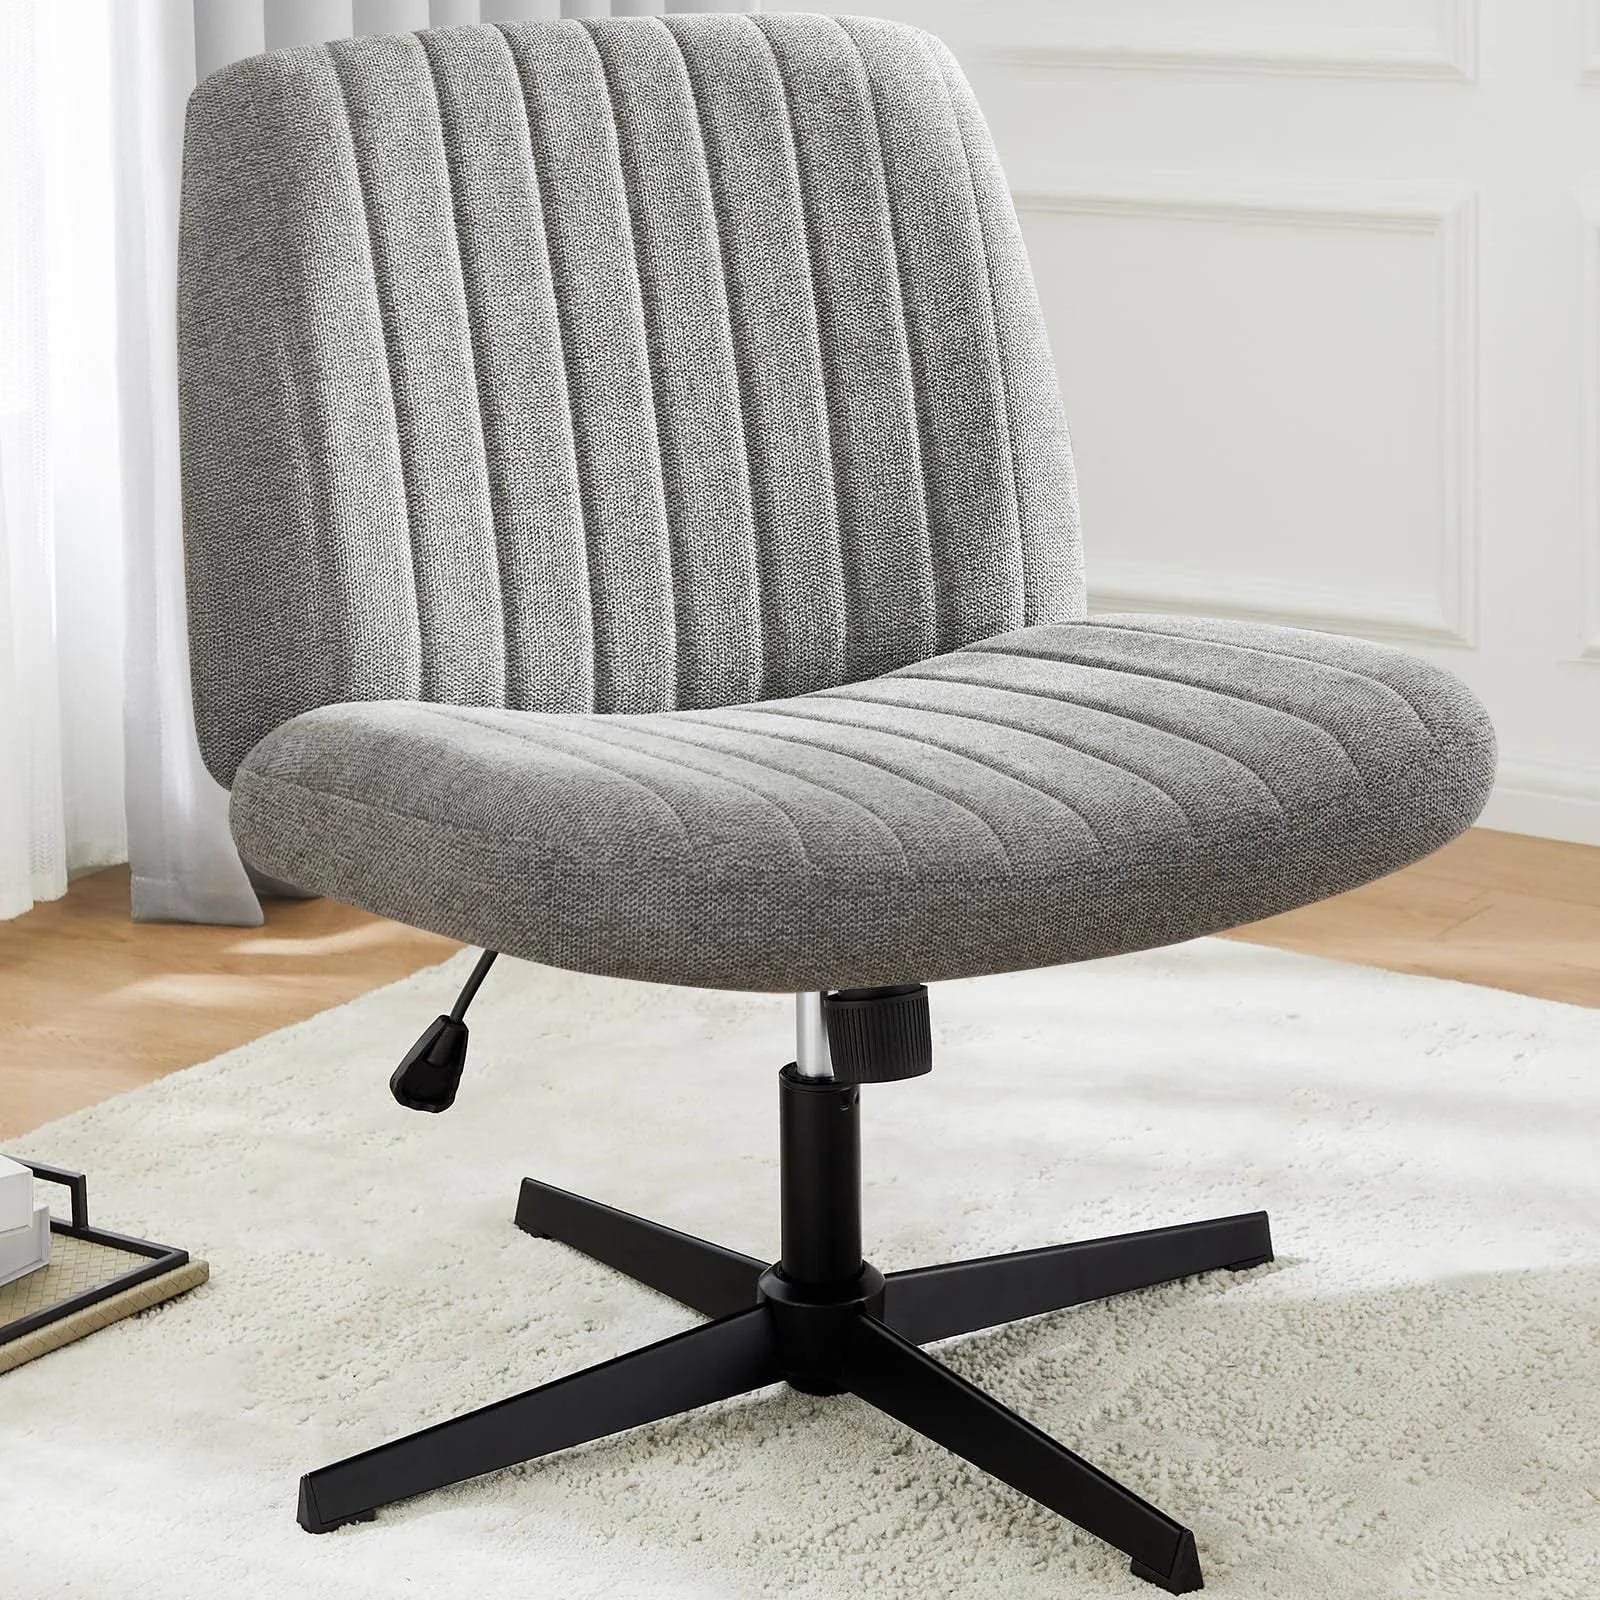 No-Wheels Swivel Office Chair for Comfort and Ease | Image